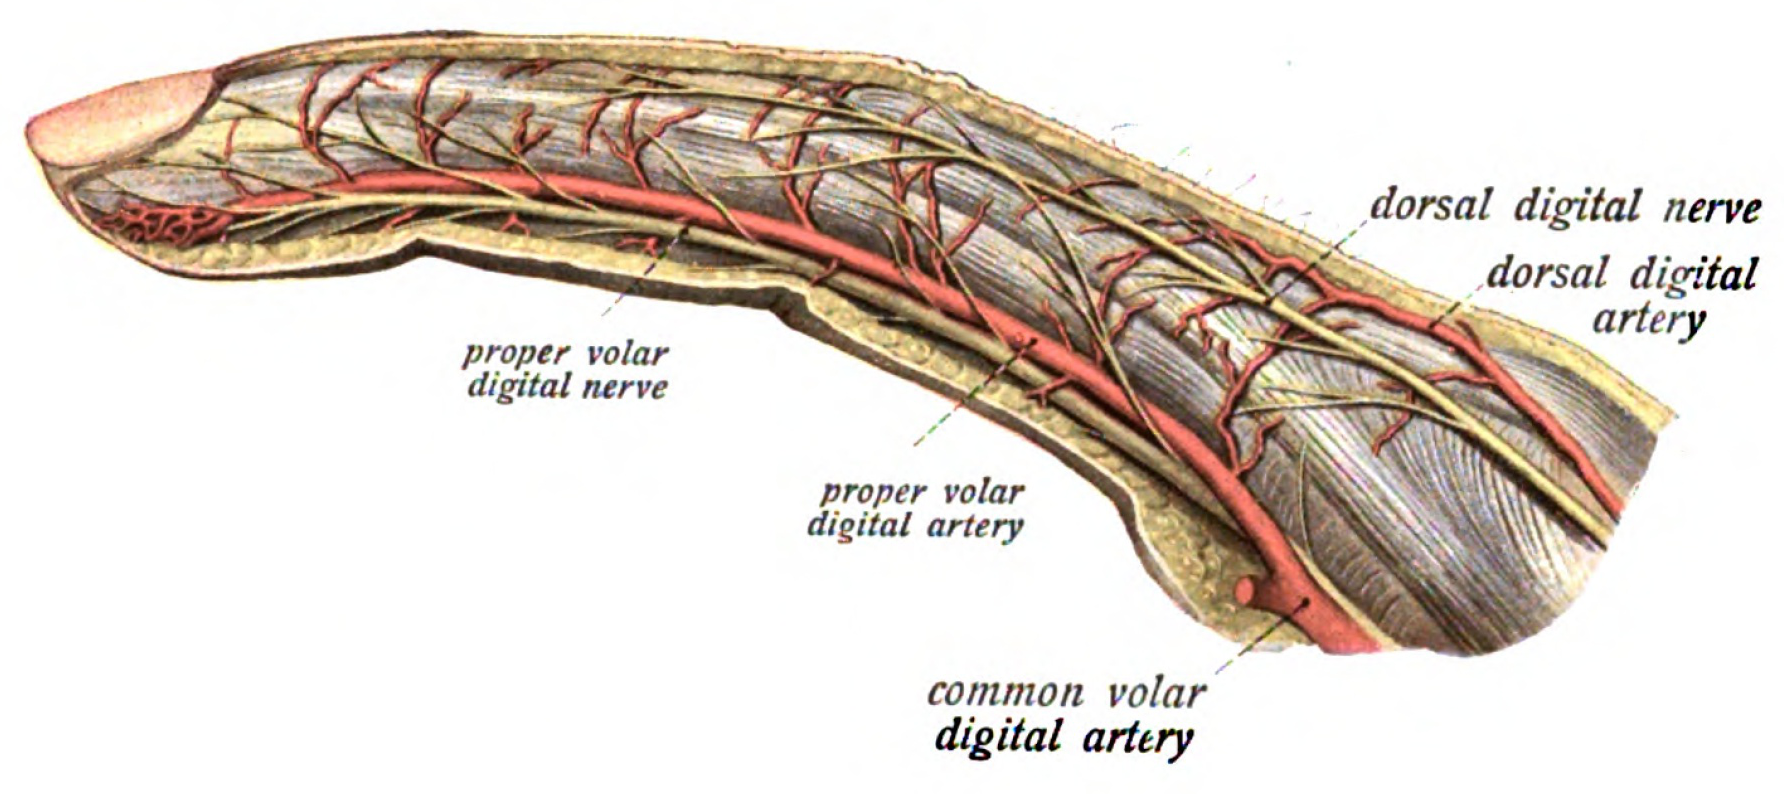 Radial artery of index finger - Wikipedia